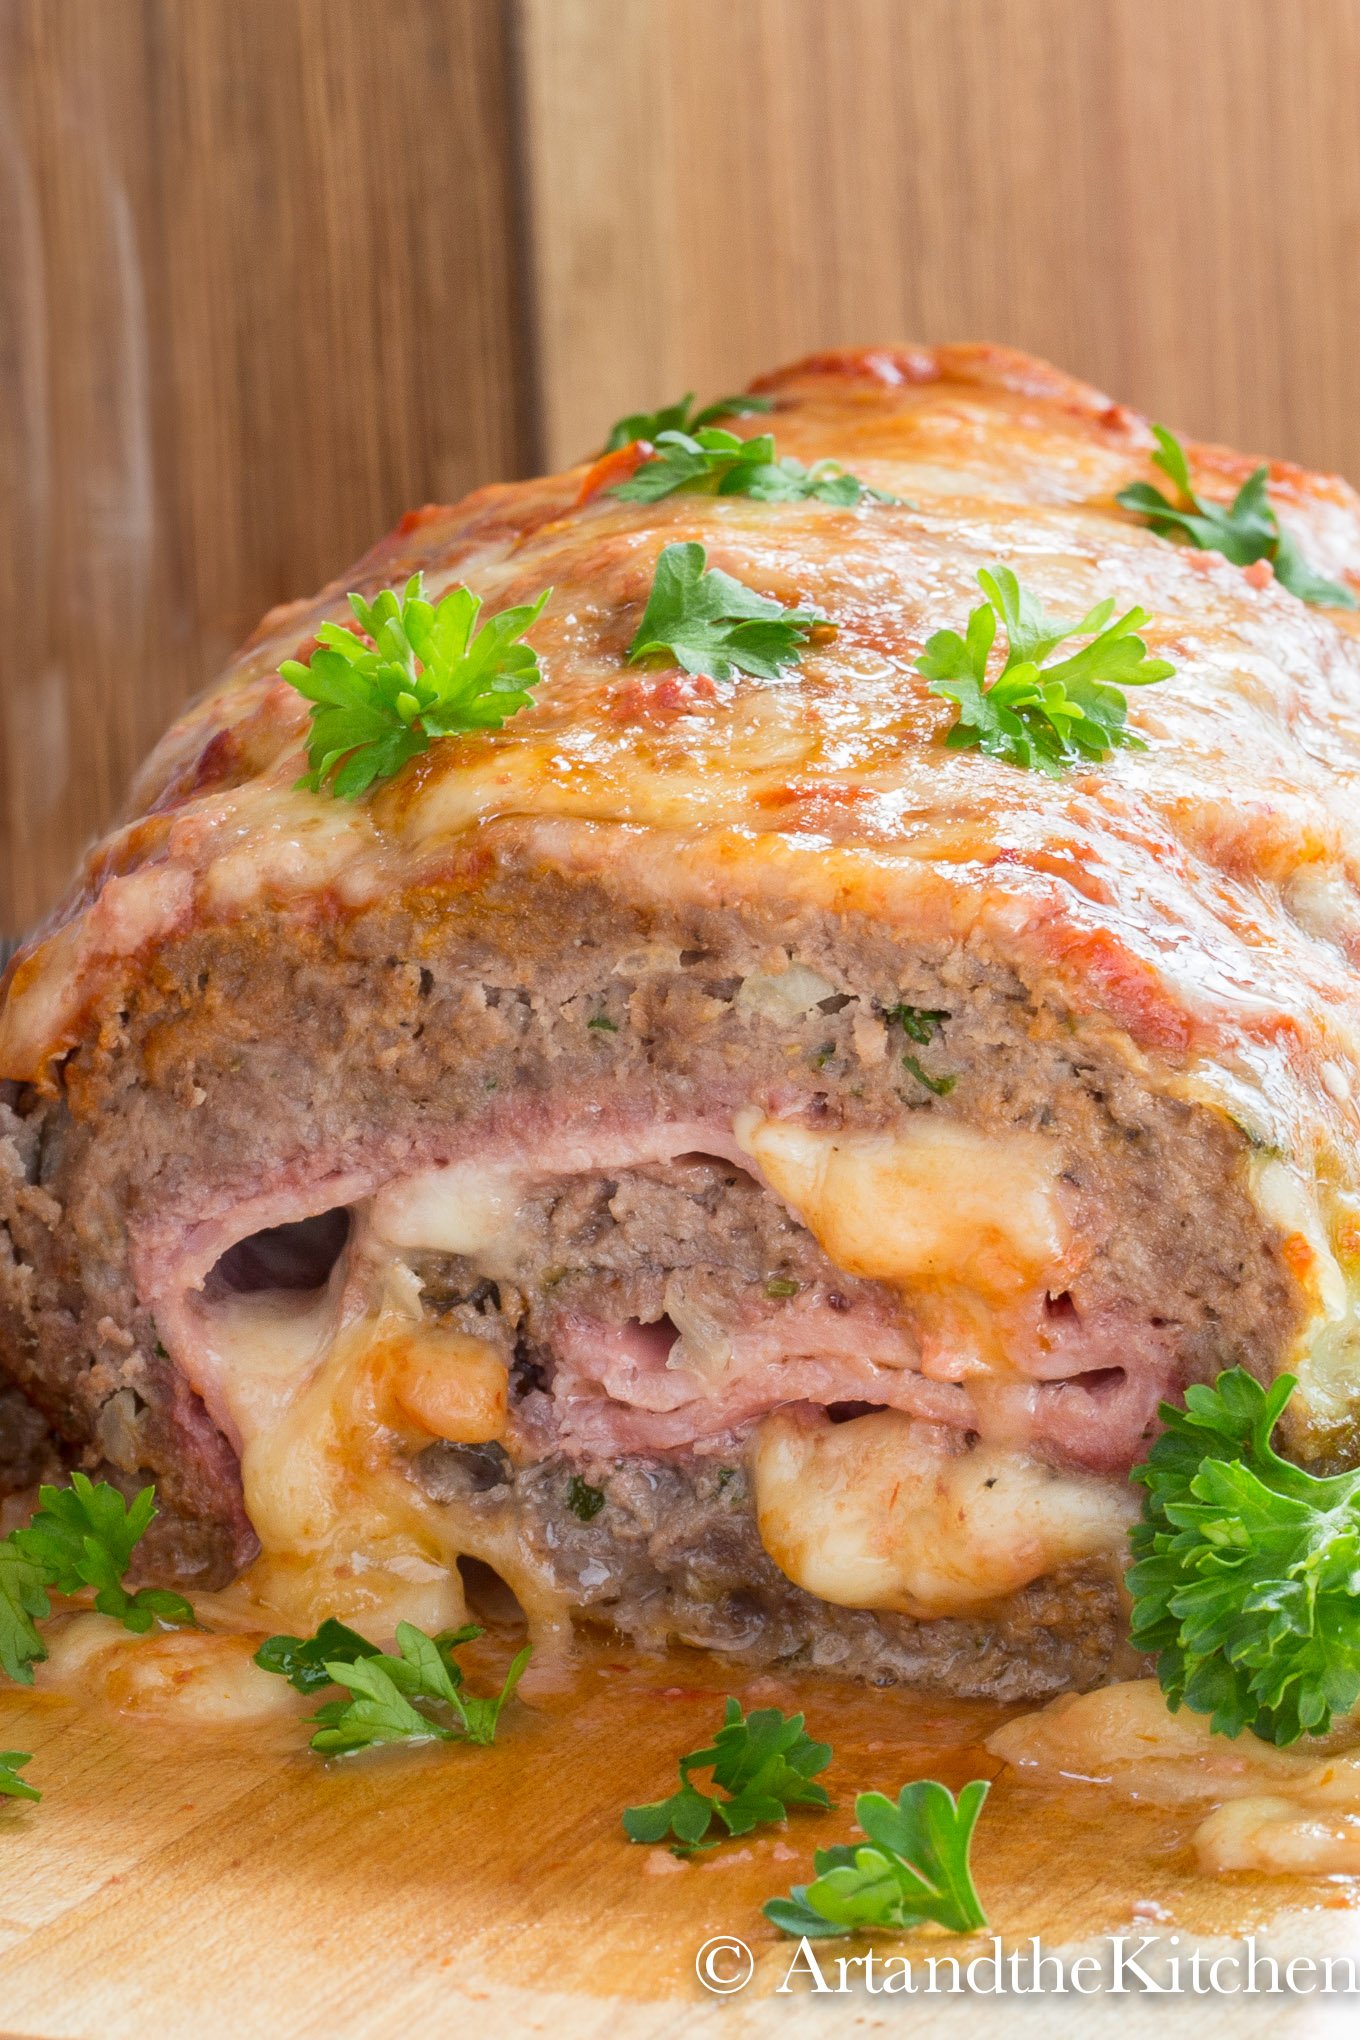 Meatloaf stuffed with ham and mozzarella cheese, garnished with parsley leaves.